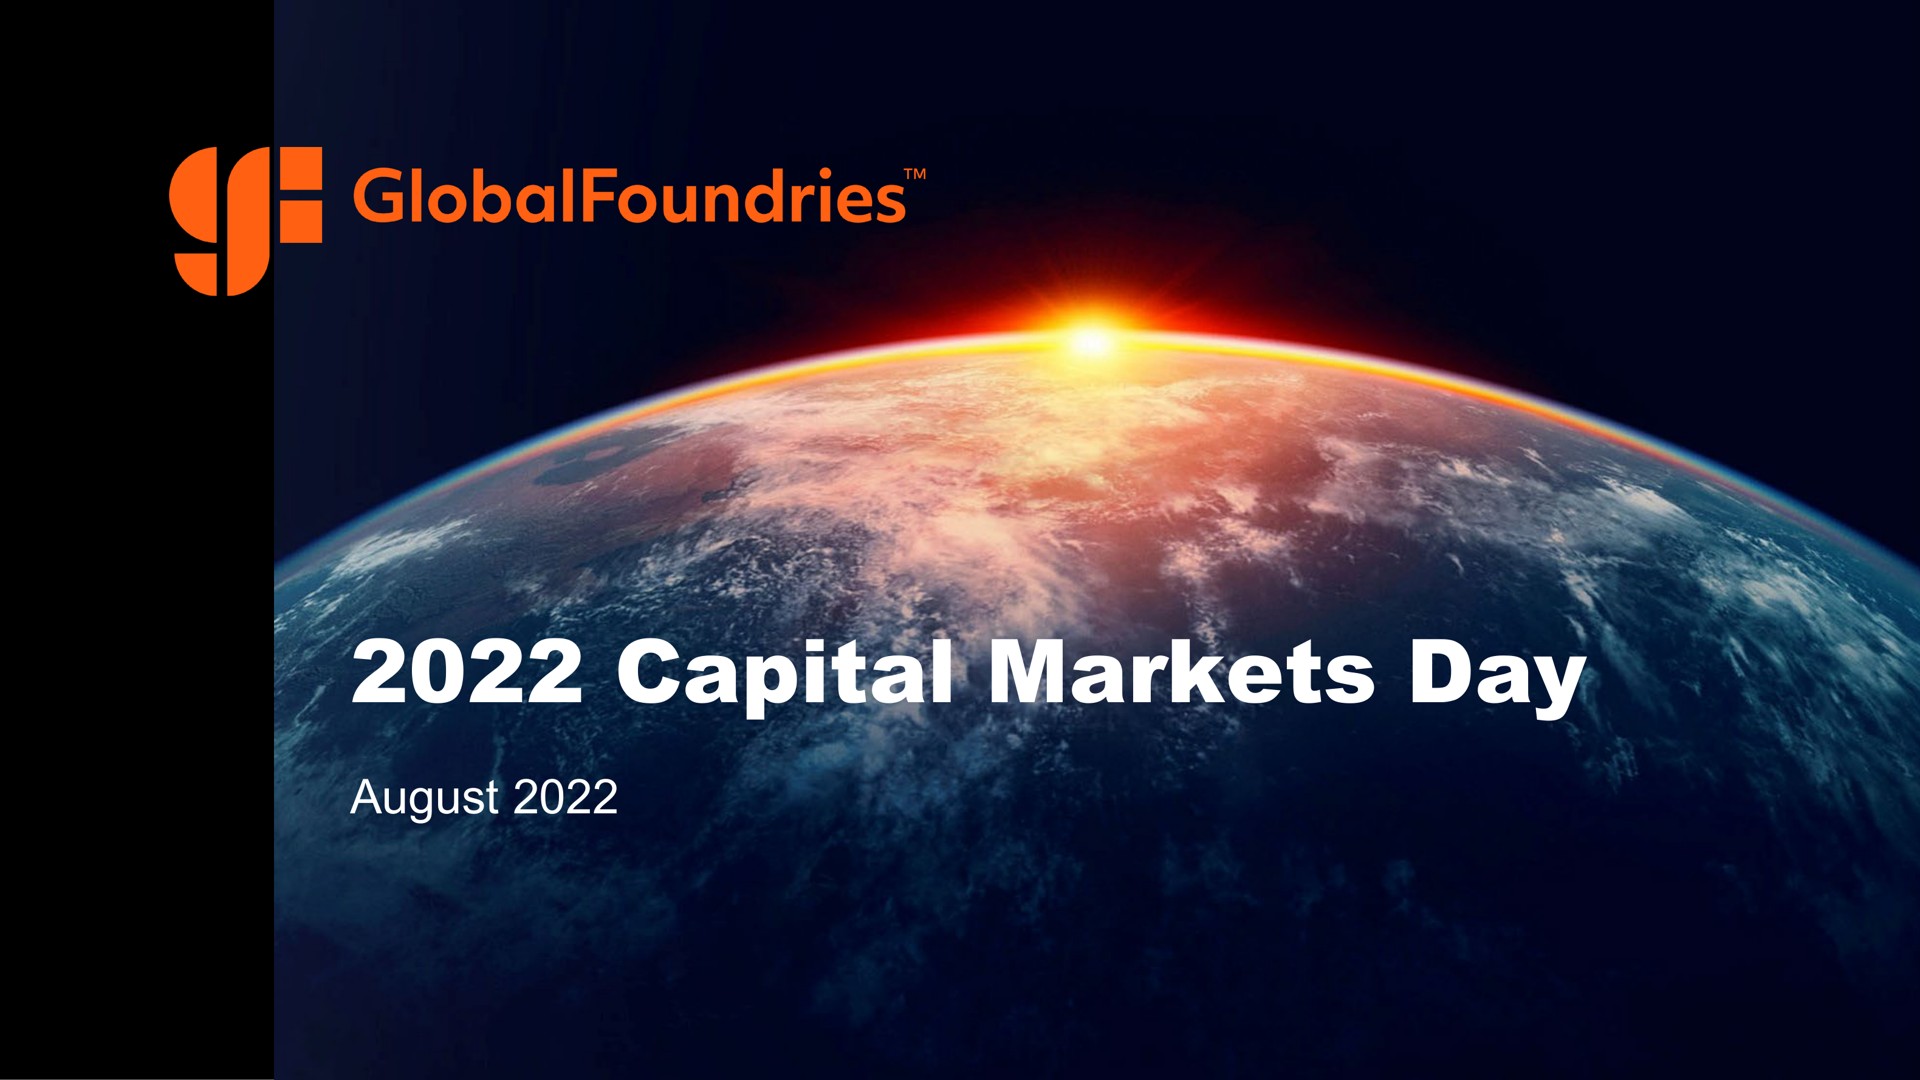 capital markets day rss i | GlobalFoundries